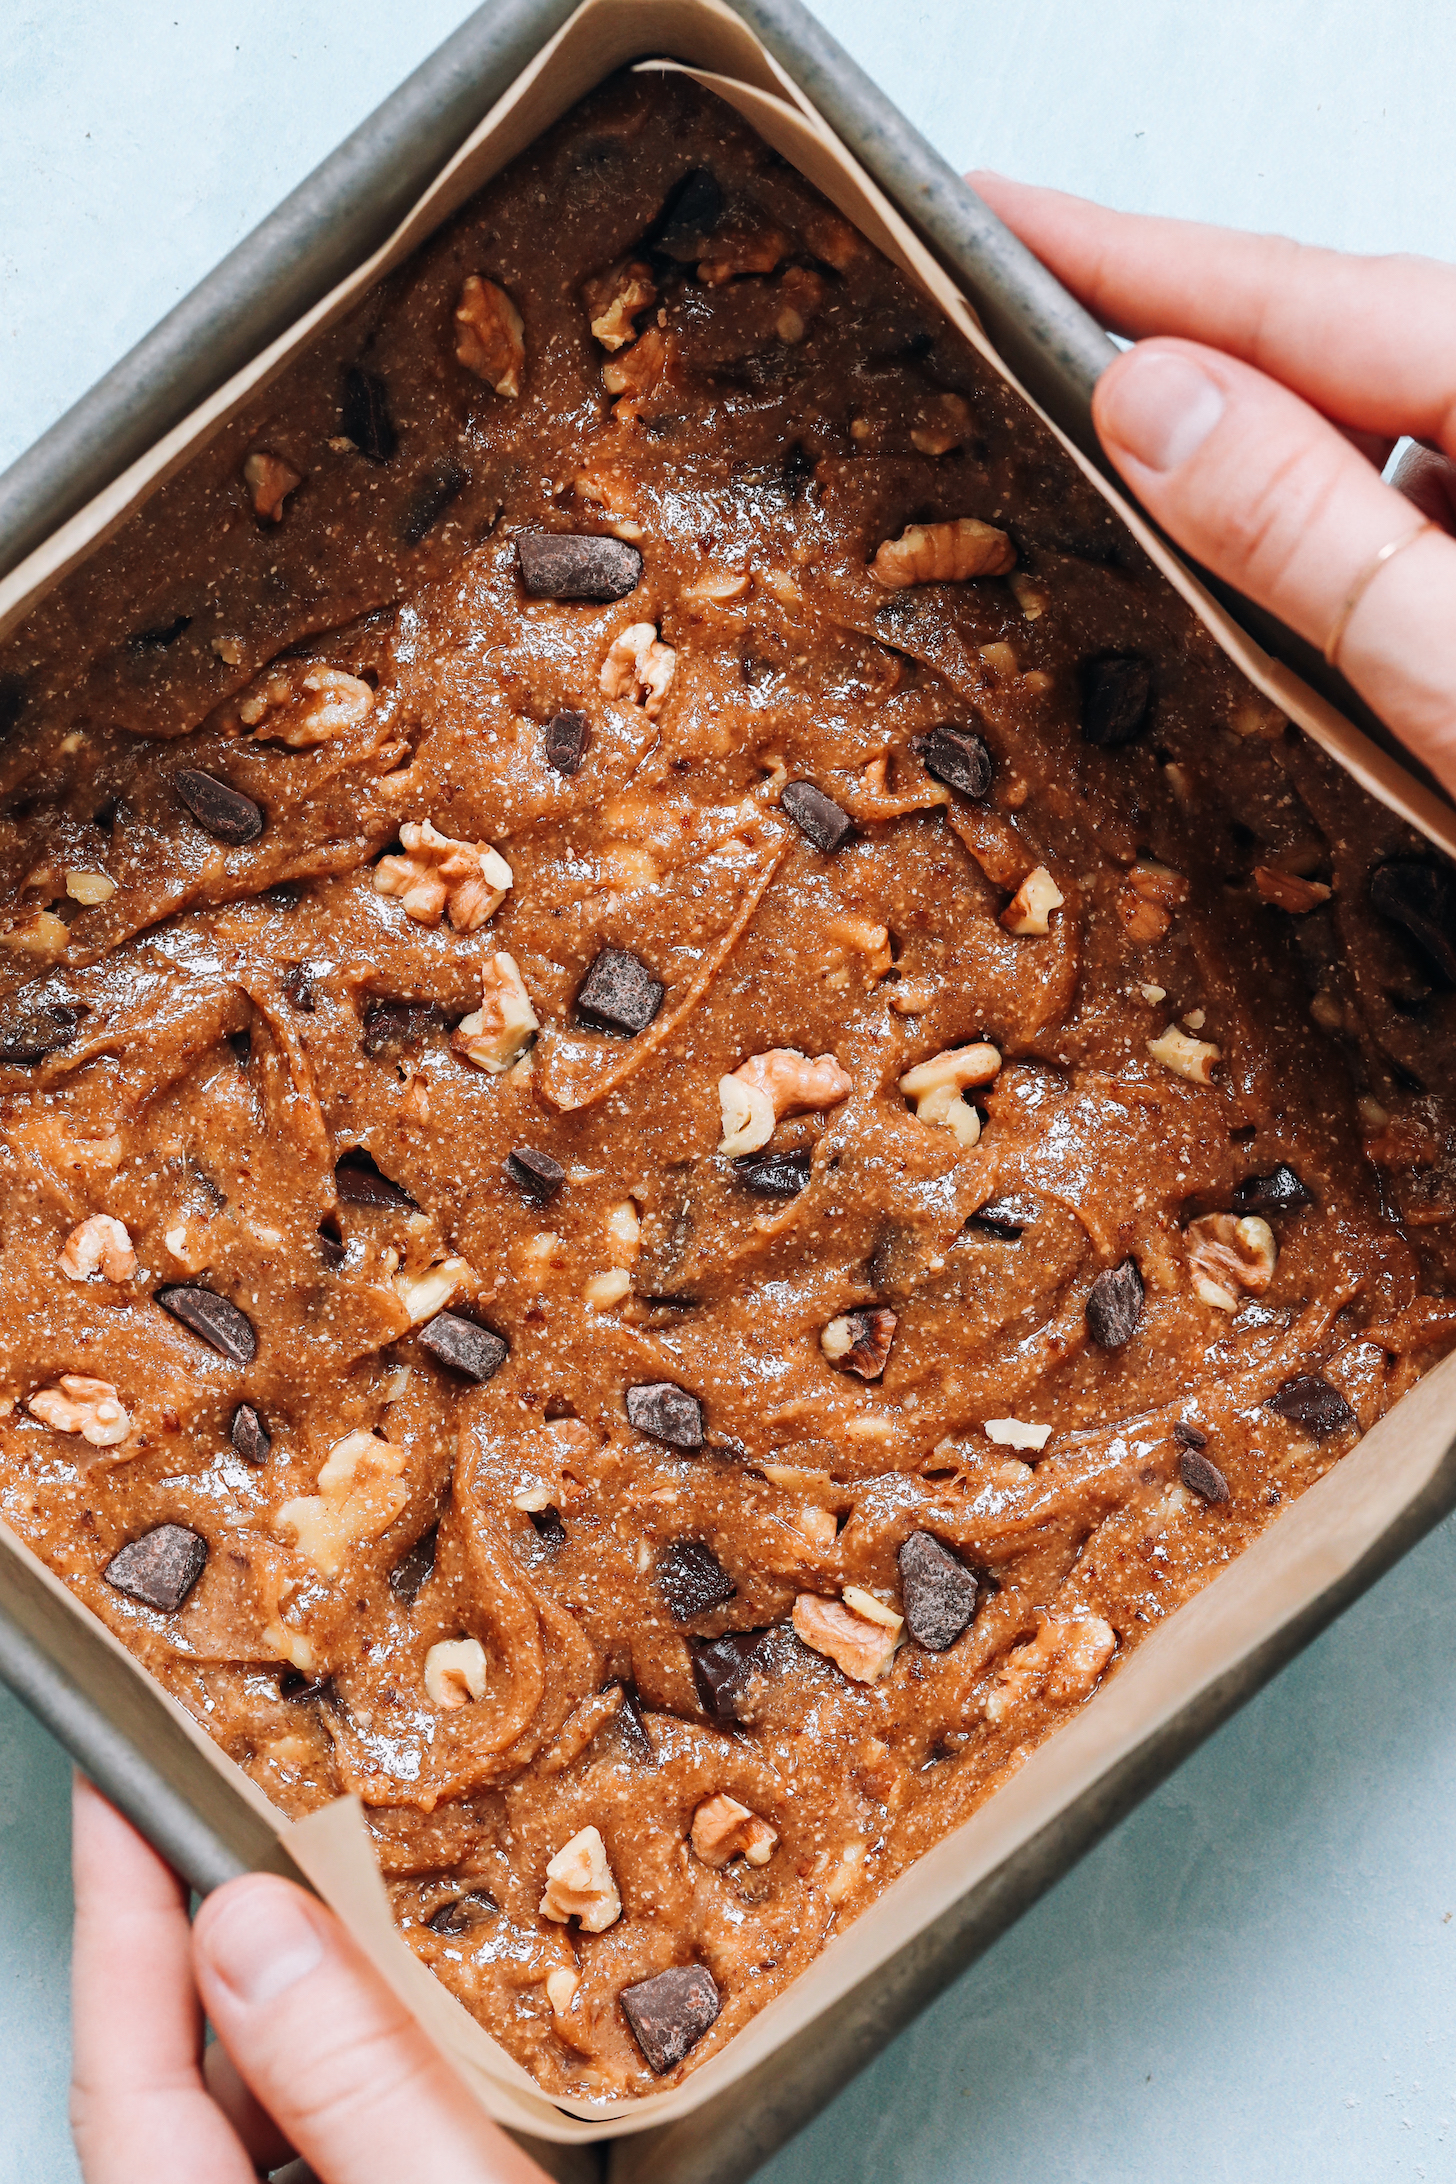 Chocolate chip cookie bar batter in a parchment-lined baking pan